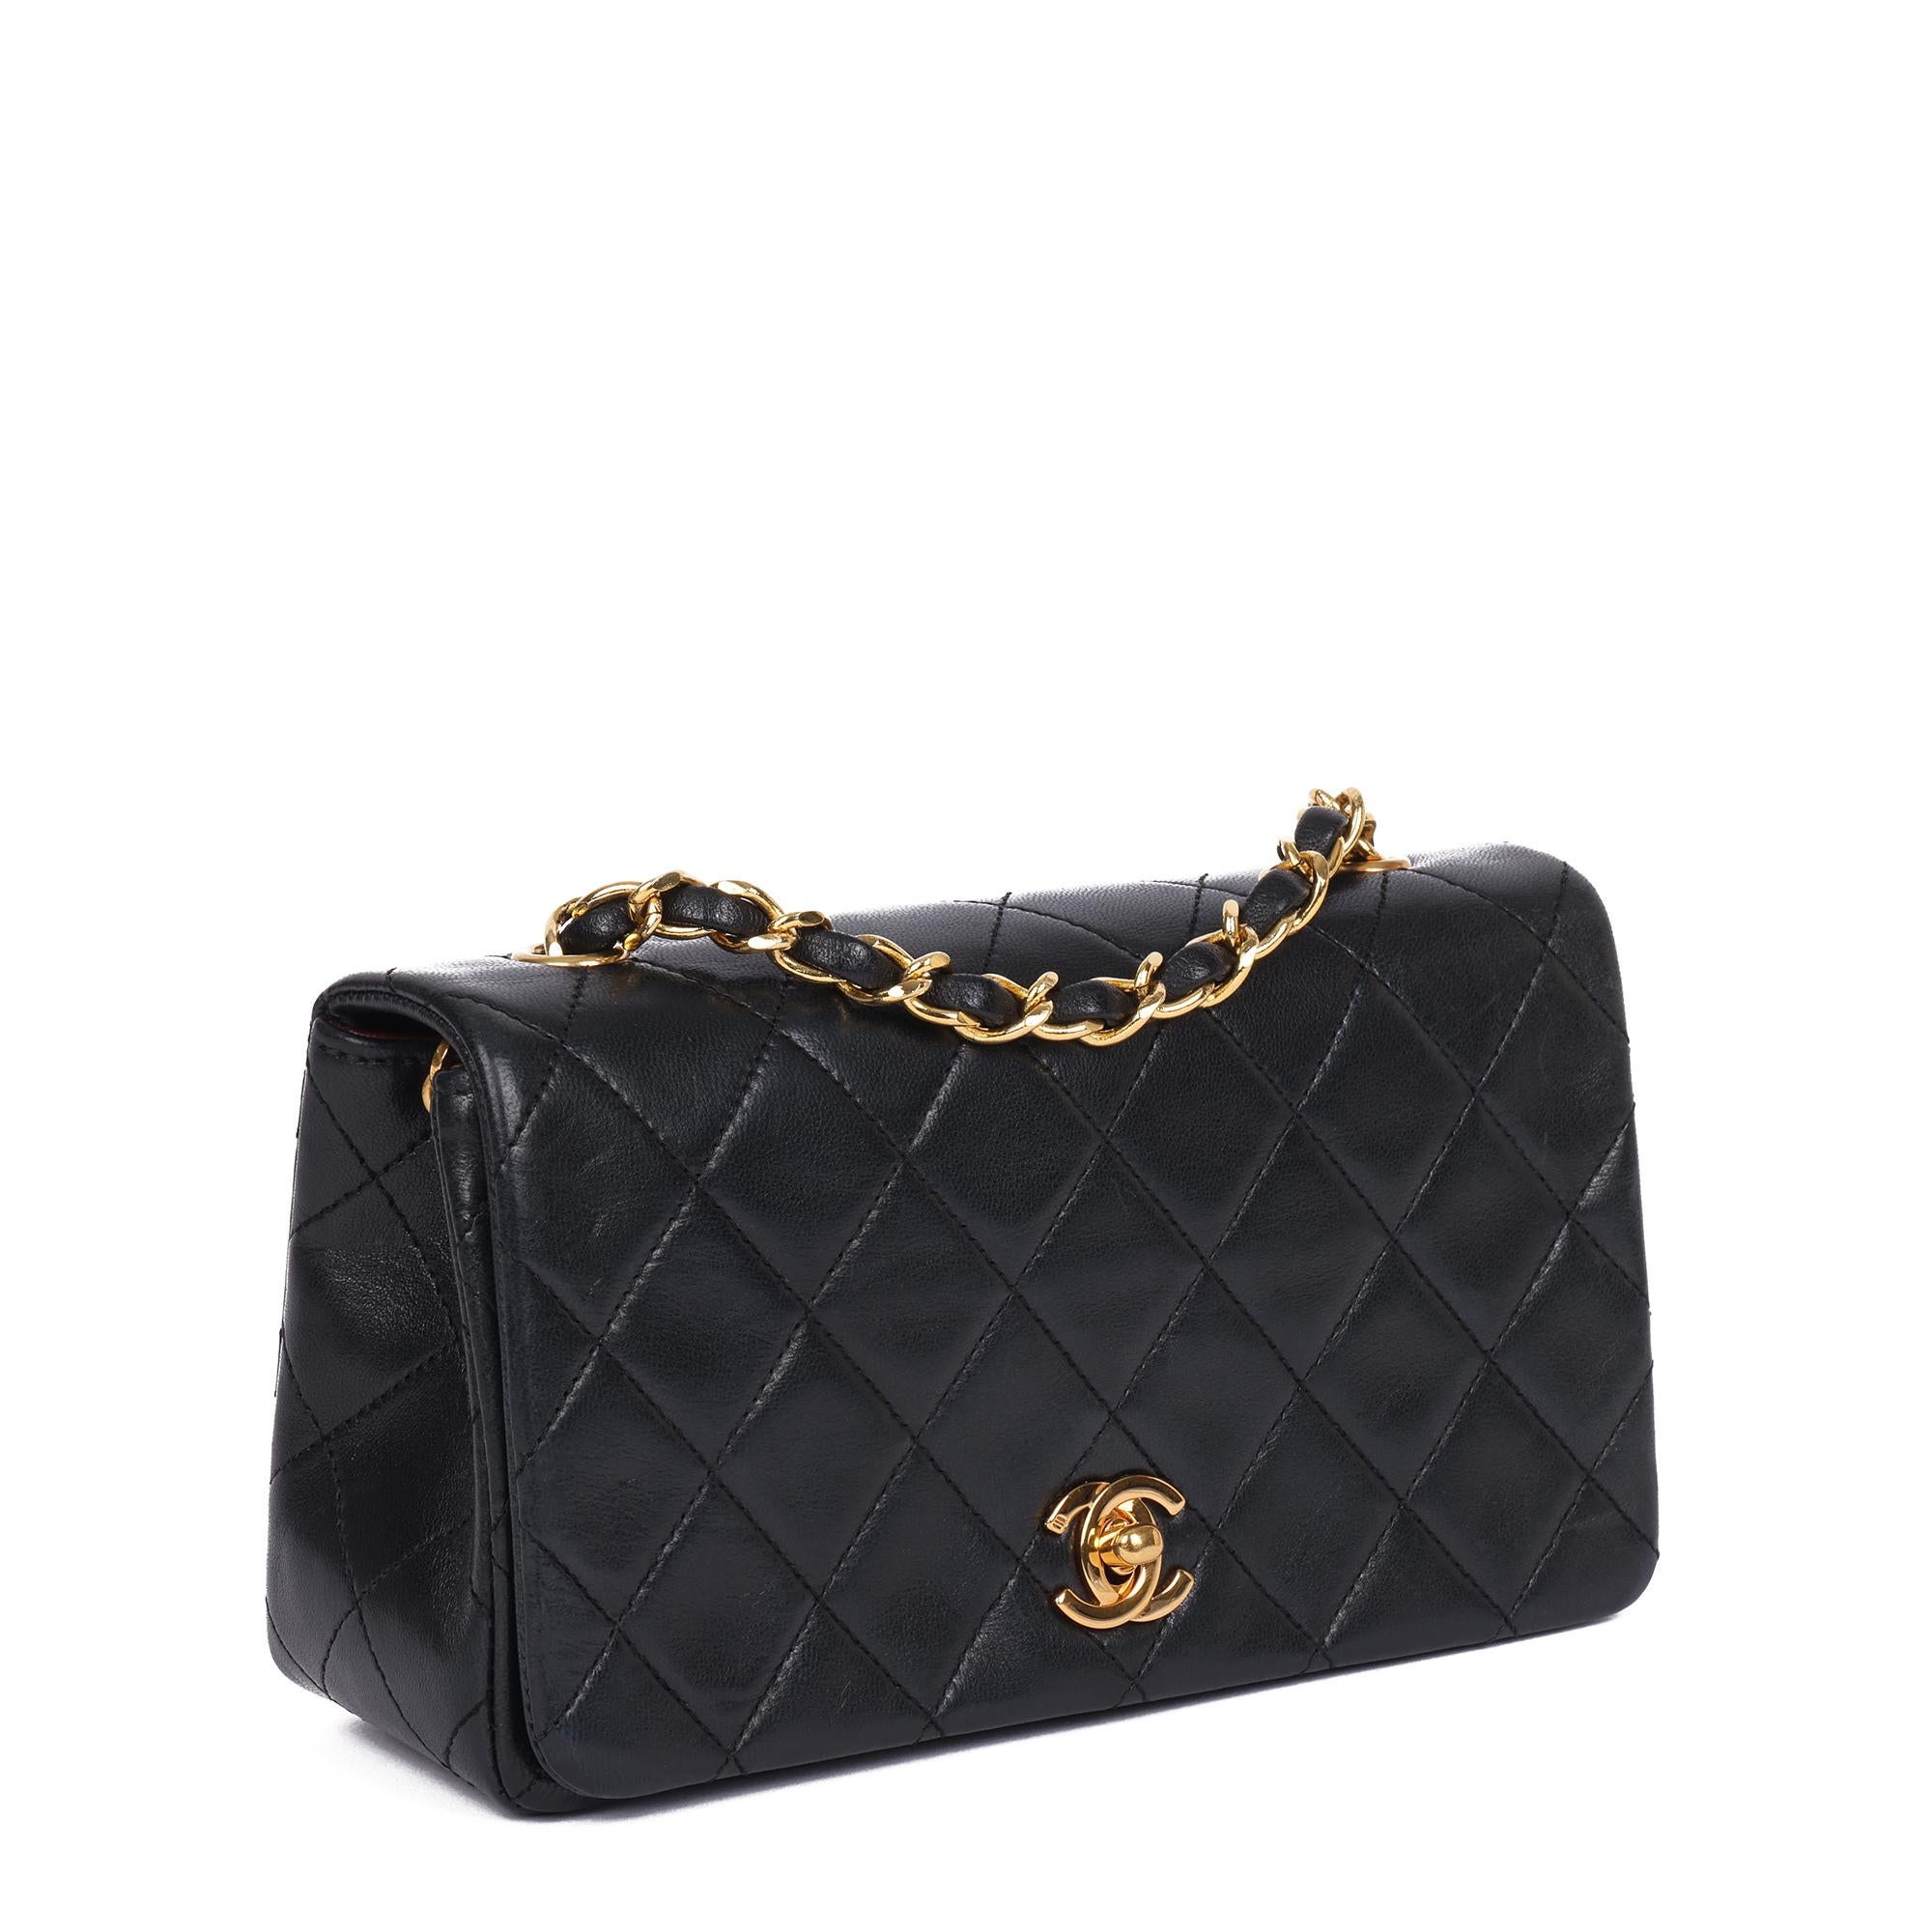 CHANEL
Black Quilted Lambskin Vintage Mini Full Flap Bag

Xupes Reference: HB4111
Serial Number: 1275925
Age (Circa): 1991
Accompanied By: Chanel Dust Bag, Authenticity Card
Authenticity Details: Authenticity Card, Serial Sticker (Made In